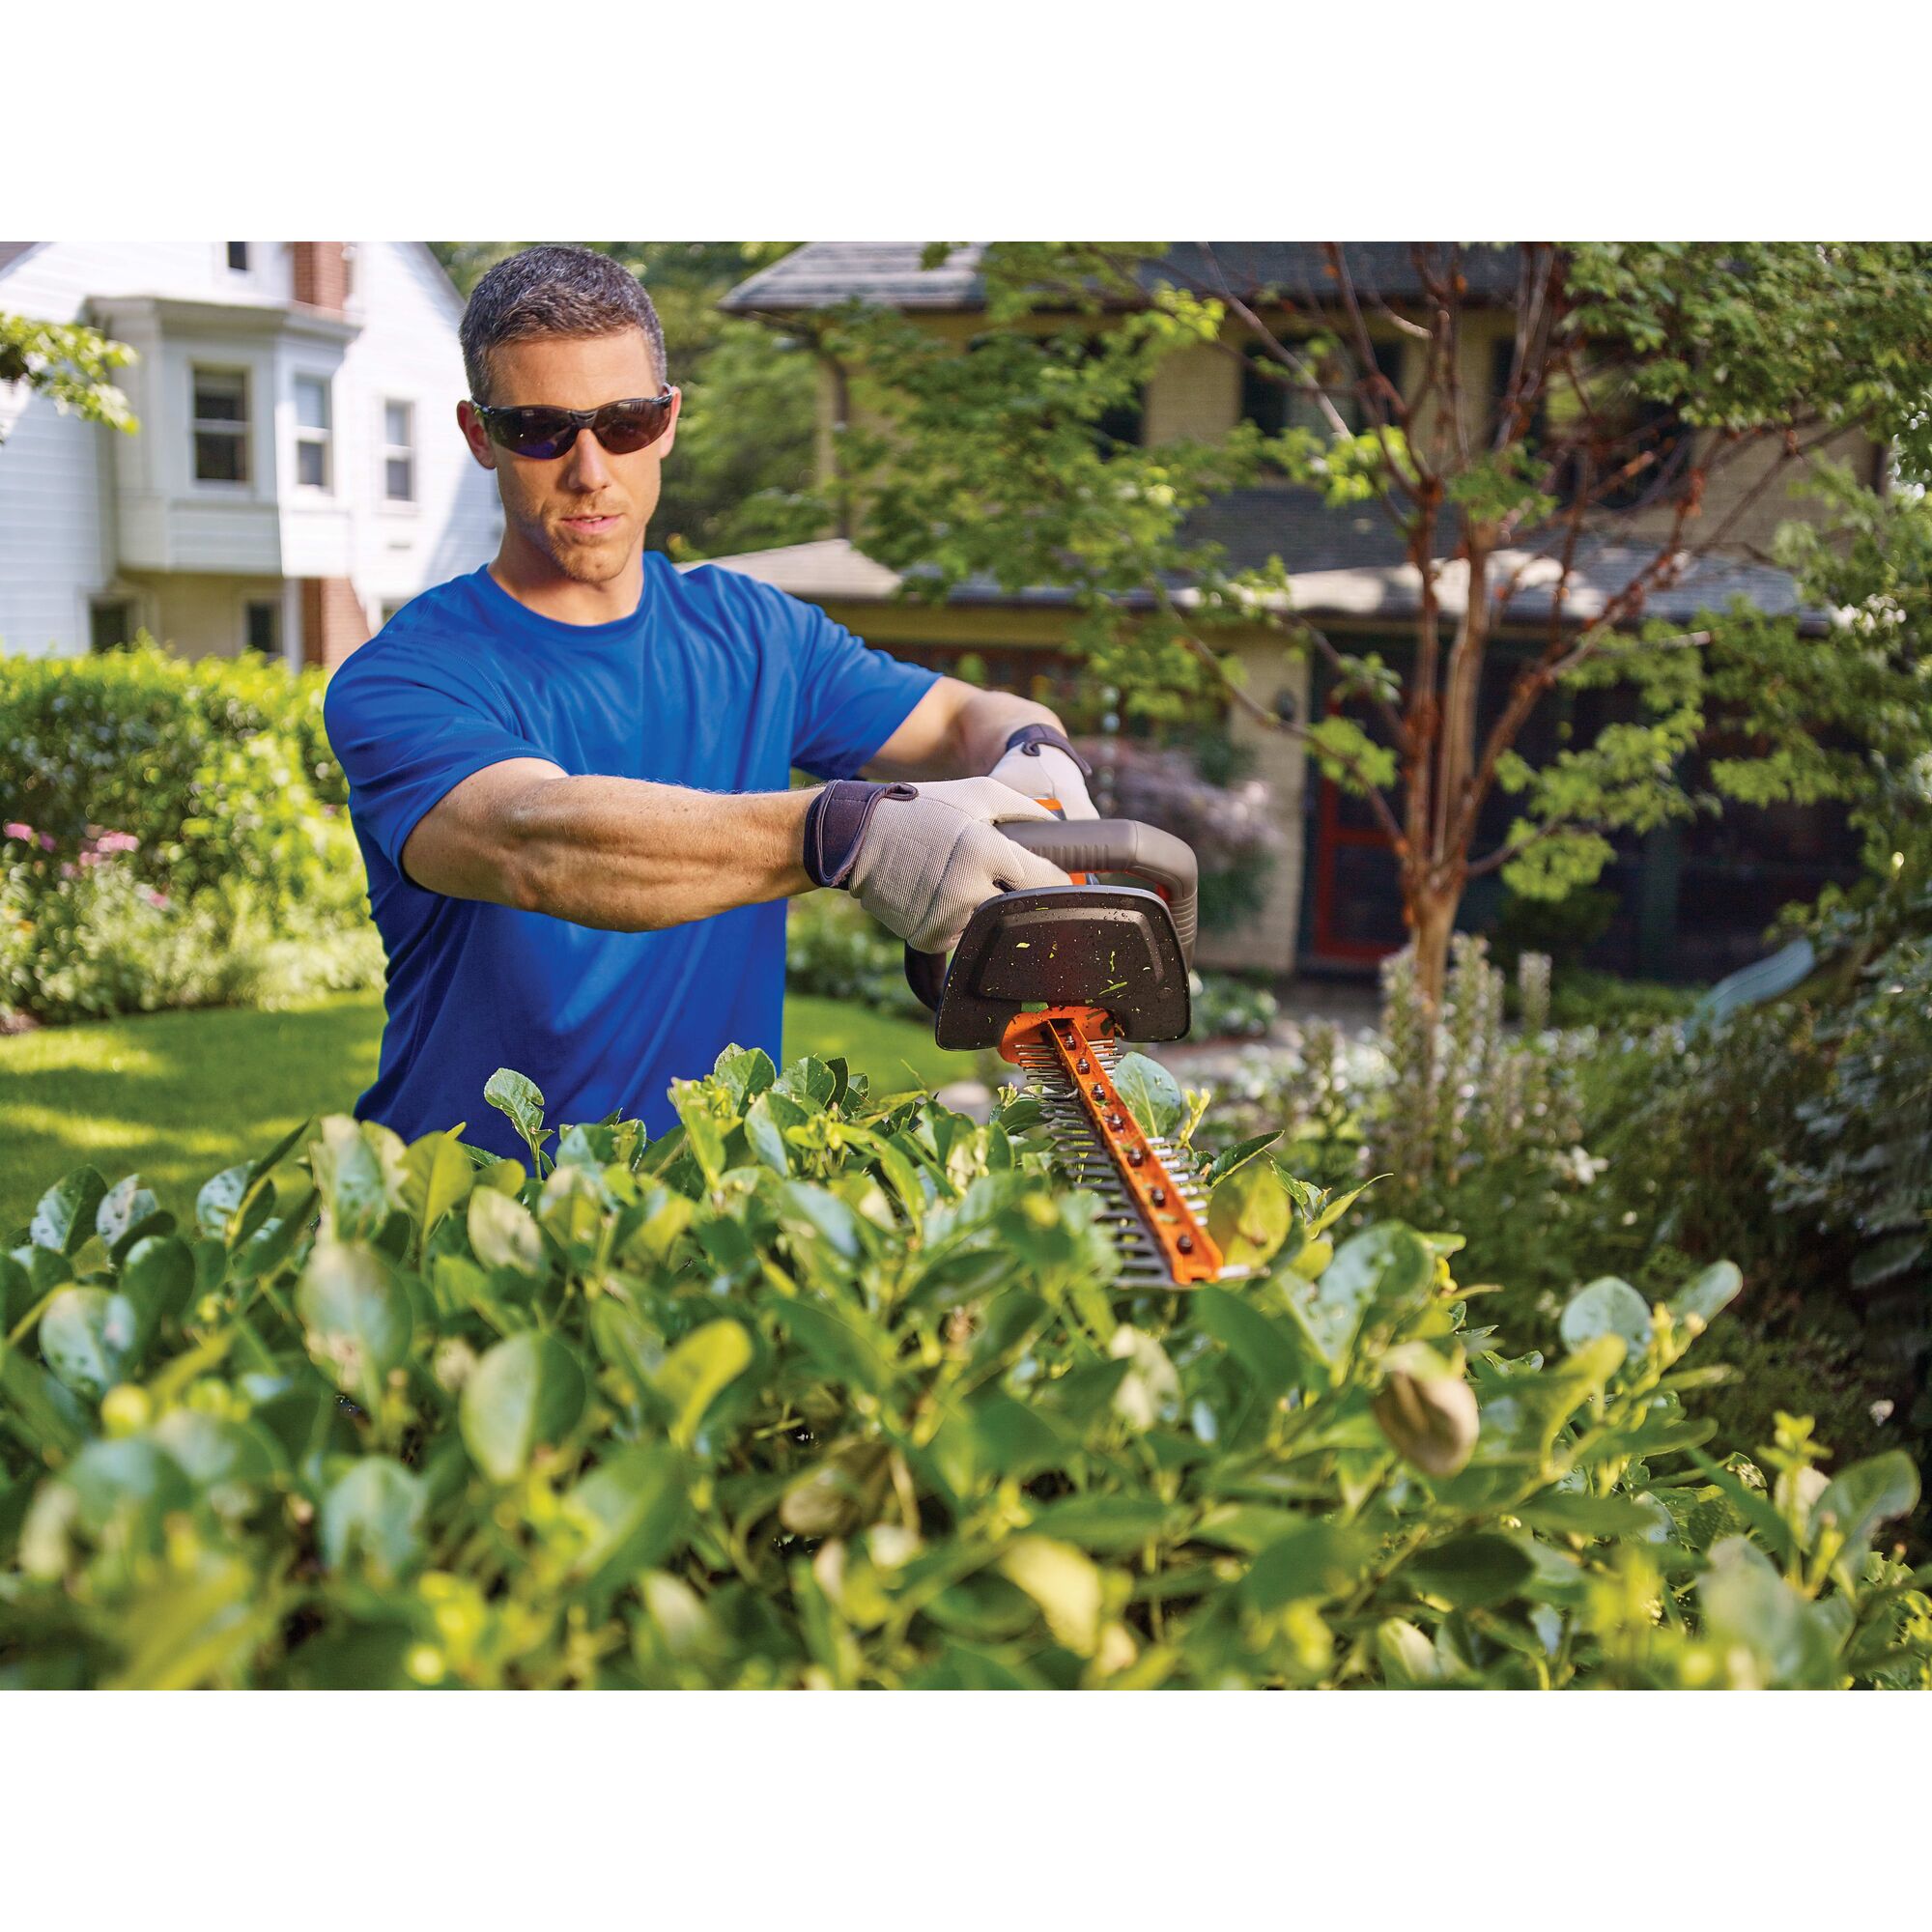 Lithium 24 inch power cut hedge trimmer being used to trim a bush by a person.